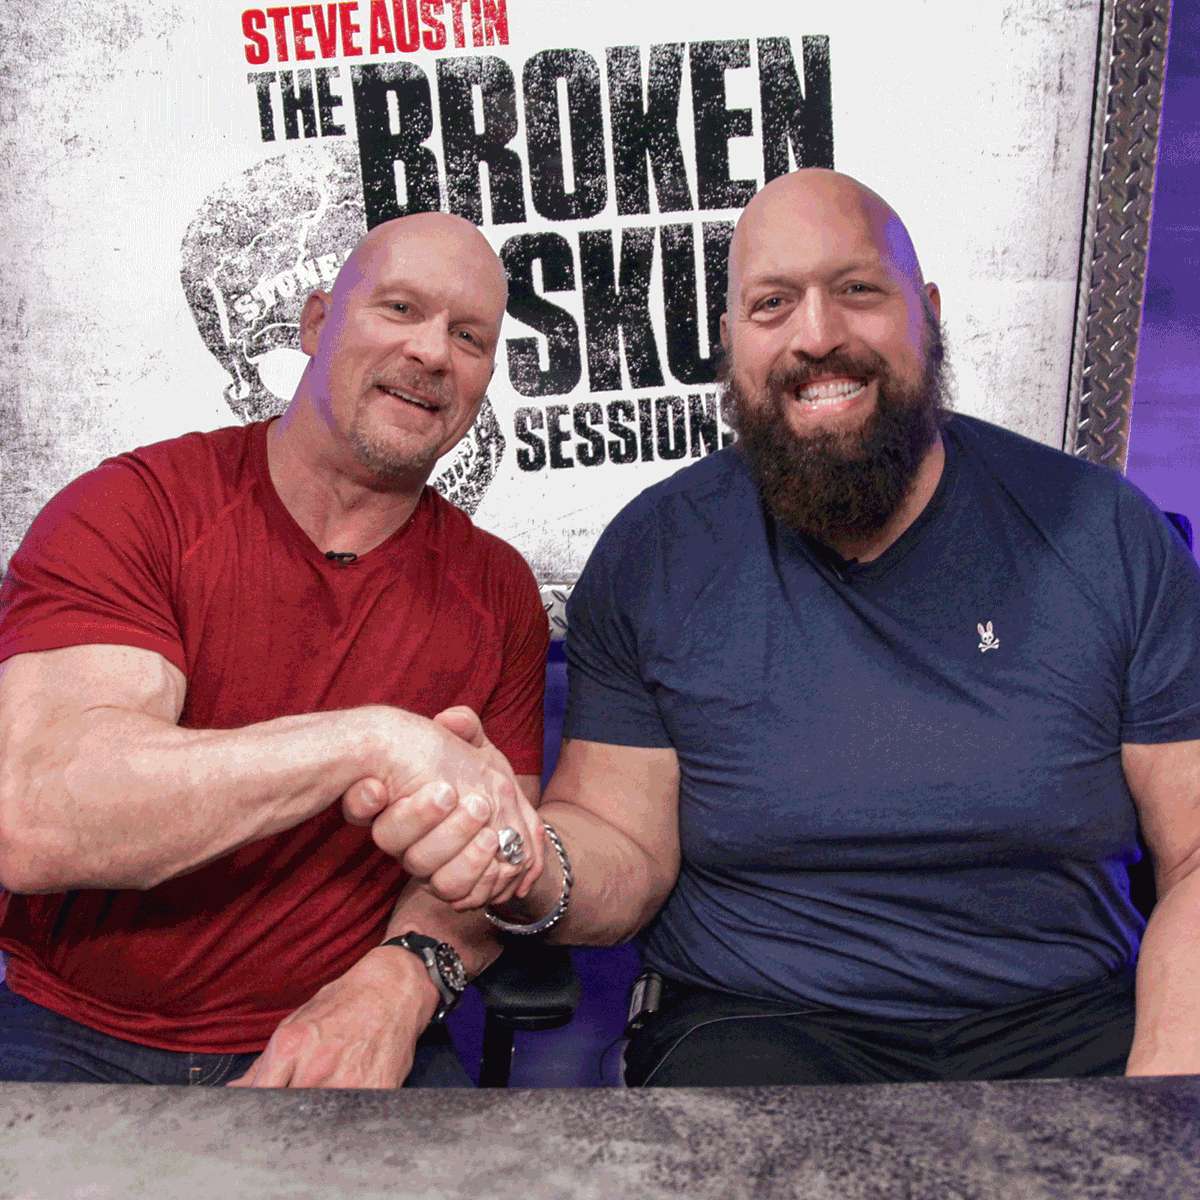 Big Show appearing on Austin's Broken Skull Sessions this month - WON/F4W -  WWE news, Pro Wrestling News, WWE Results, AEW News, AEW results